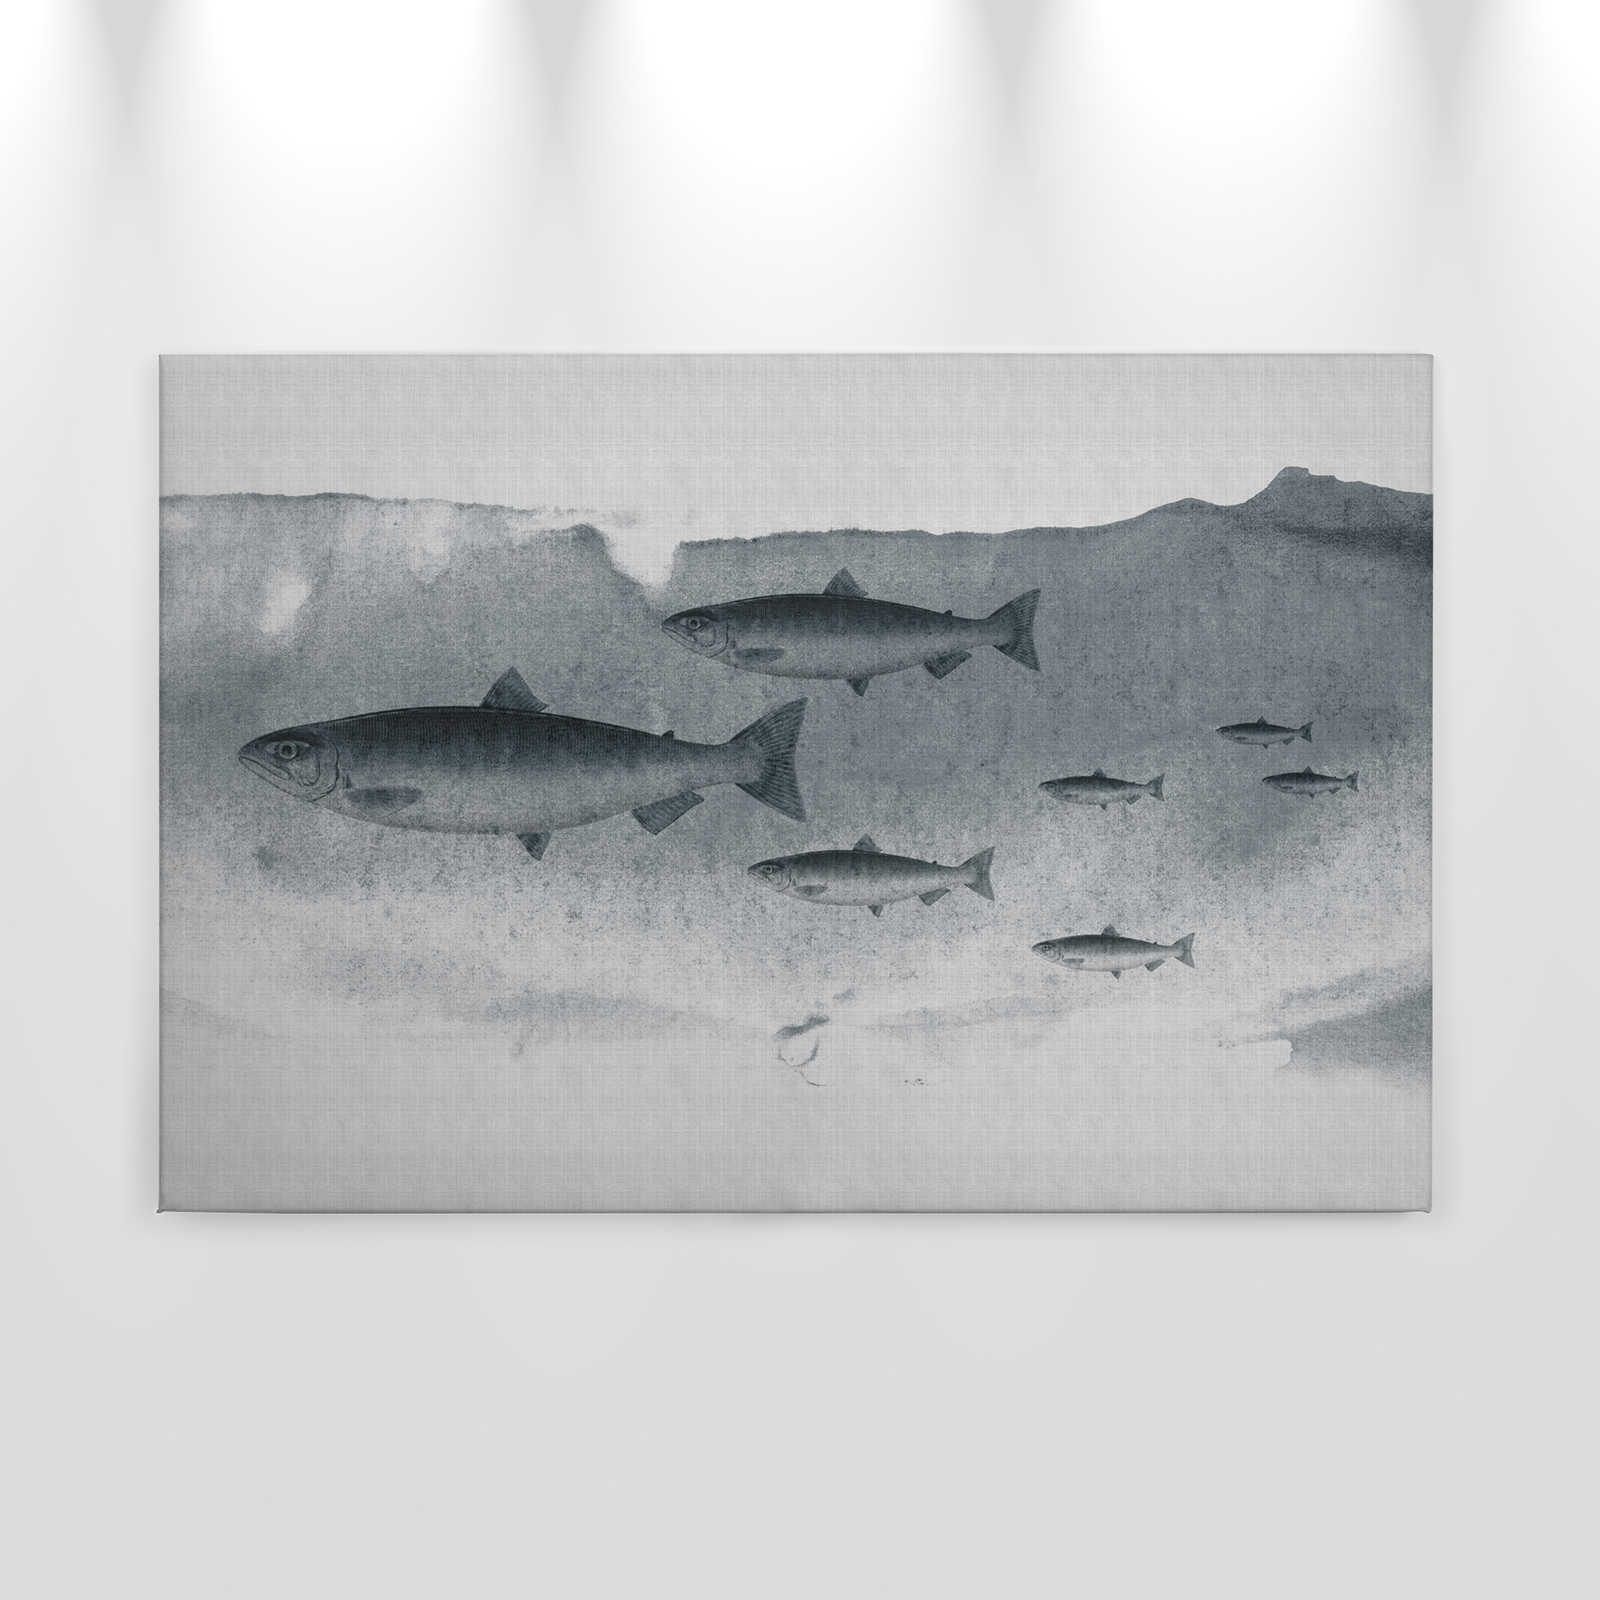             Into the blue 3 - Fish watercolour in grey as canvas picture in natural linen structure - 0.90 m x 0.60 m
        